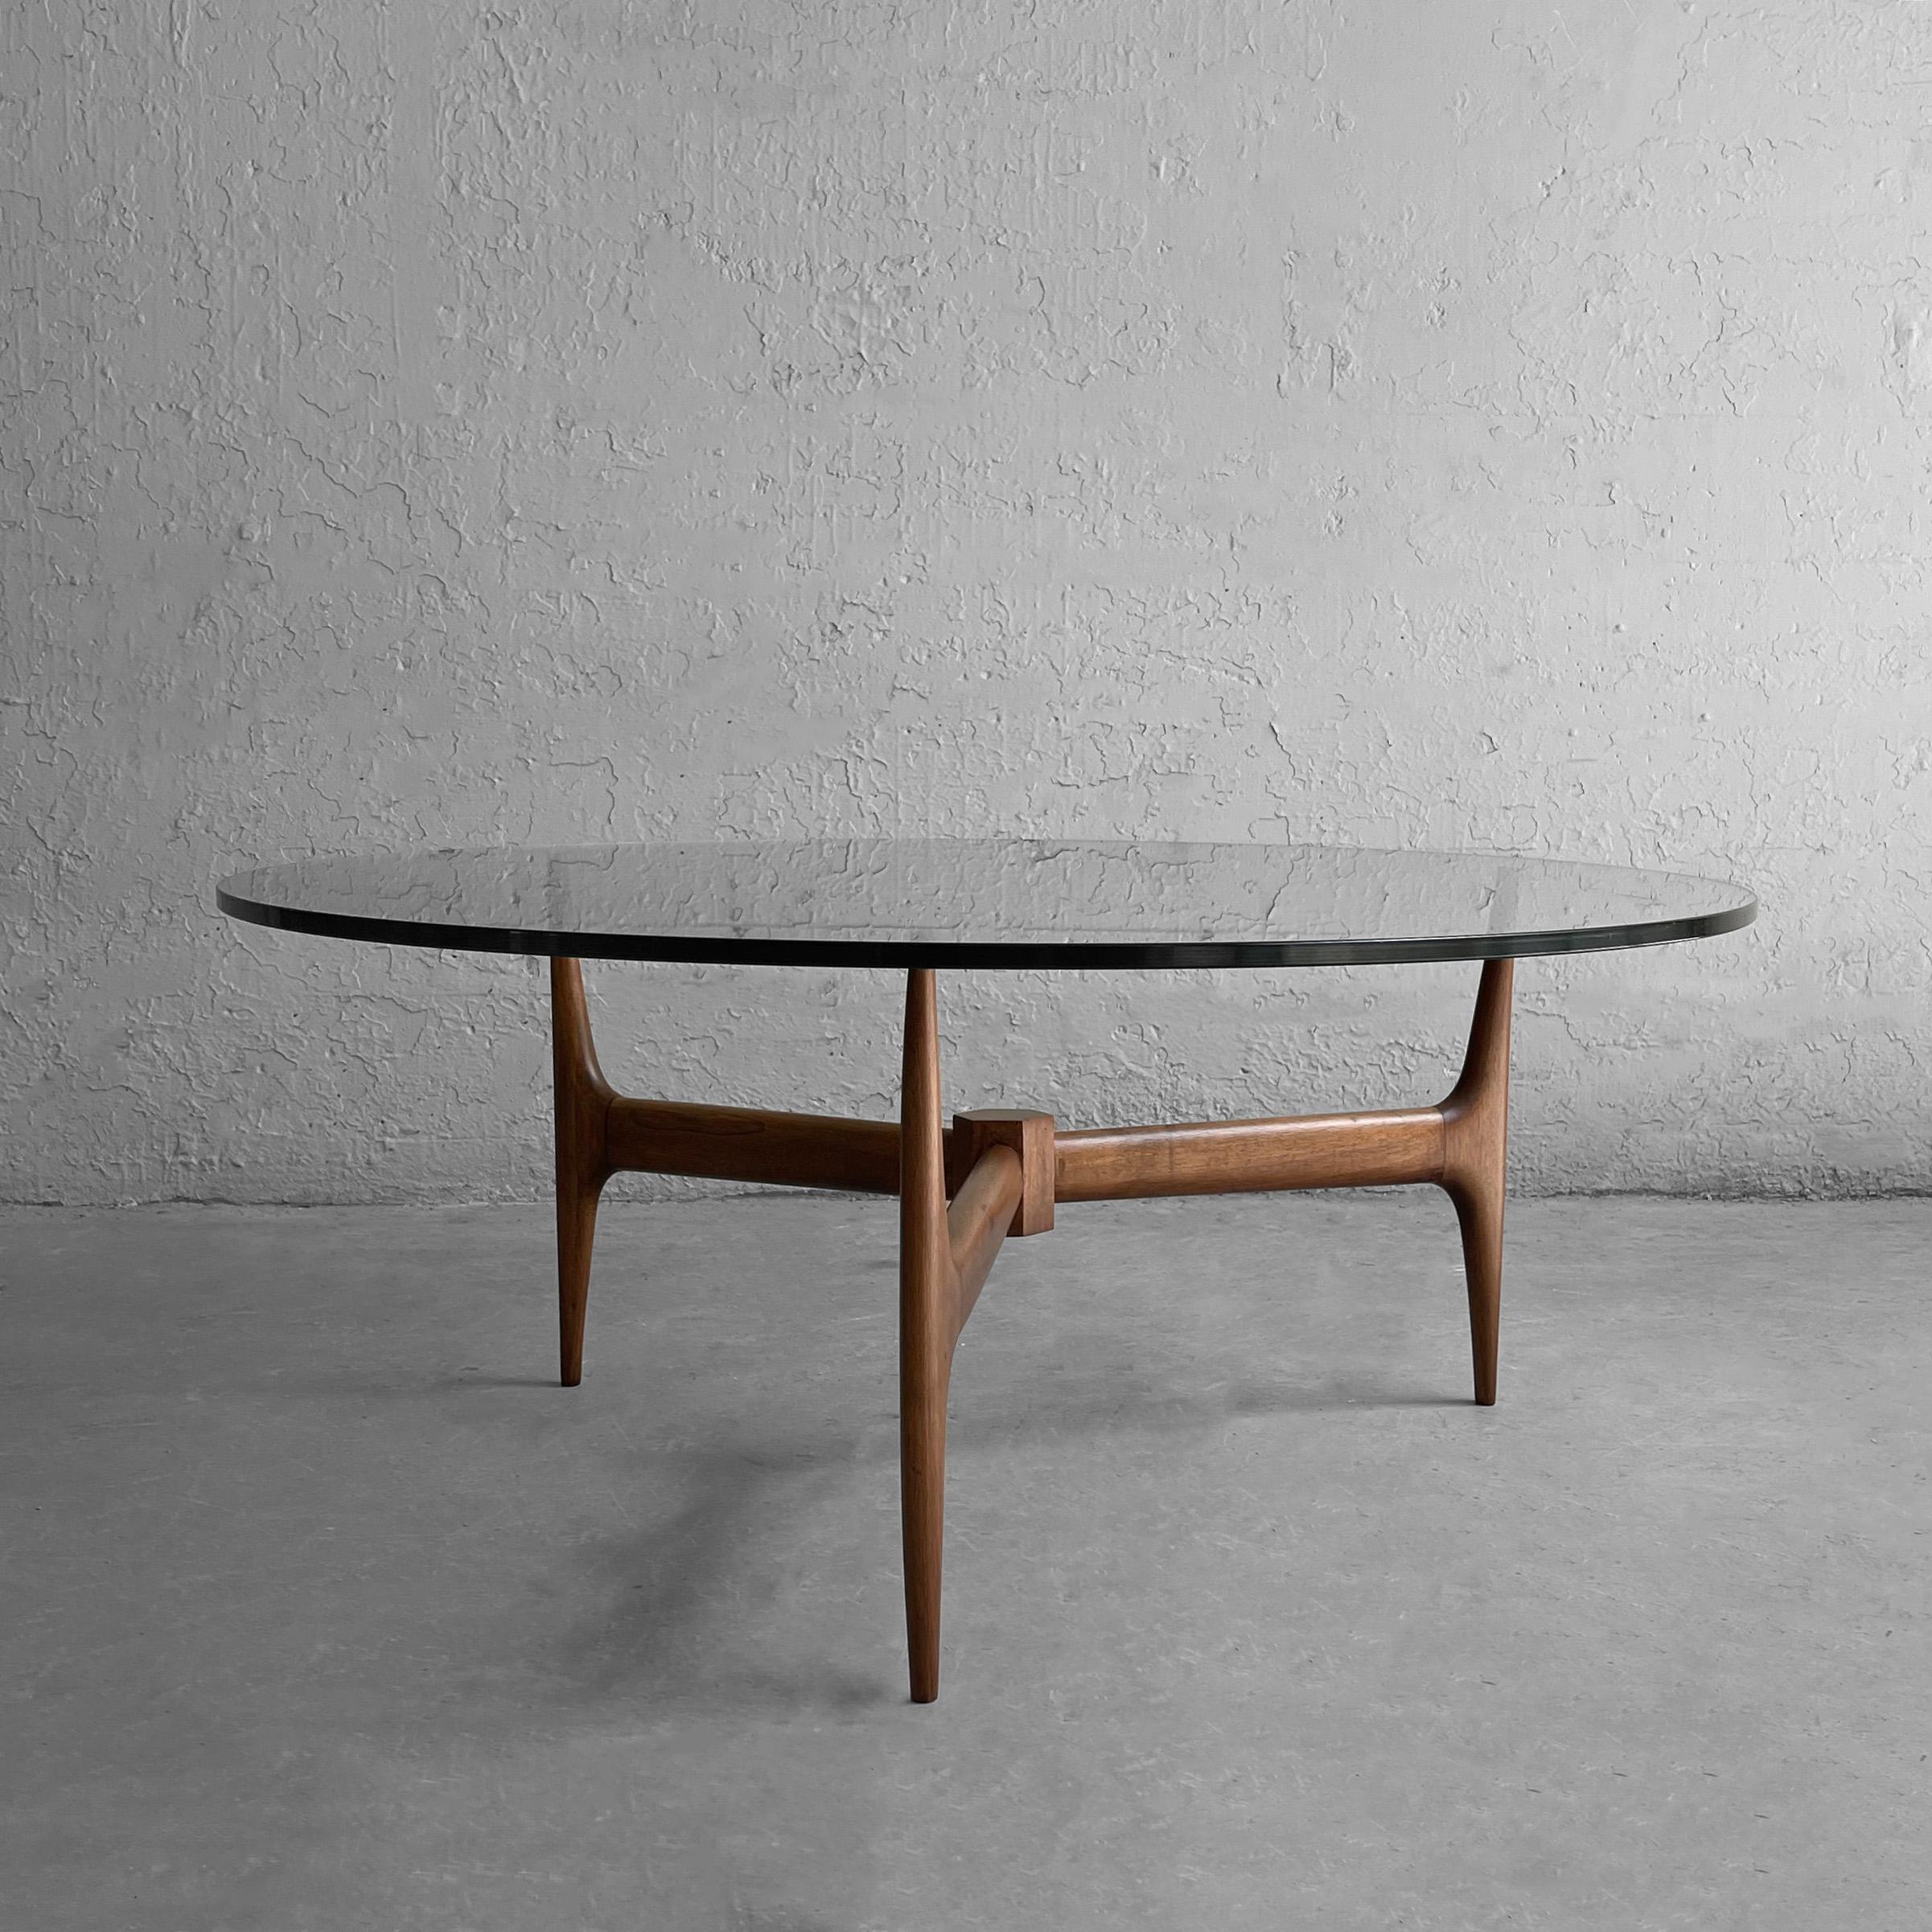 Elegant, Mid-Century Modern coffee table features a sculptural walnut tripod base with 36 inch round glass top. The top rests on the base.